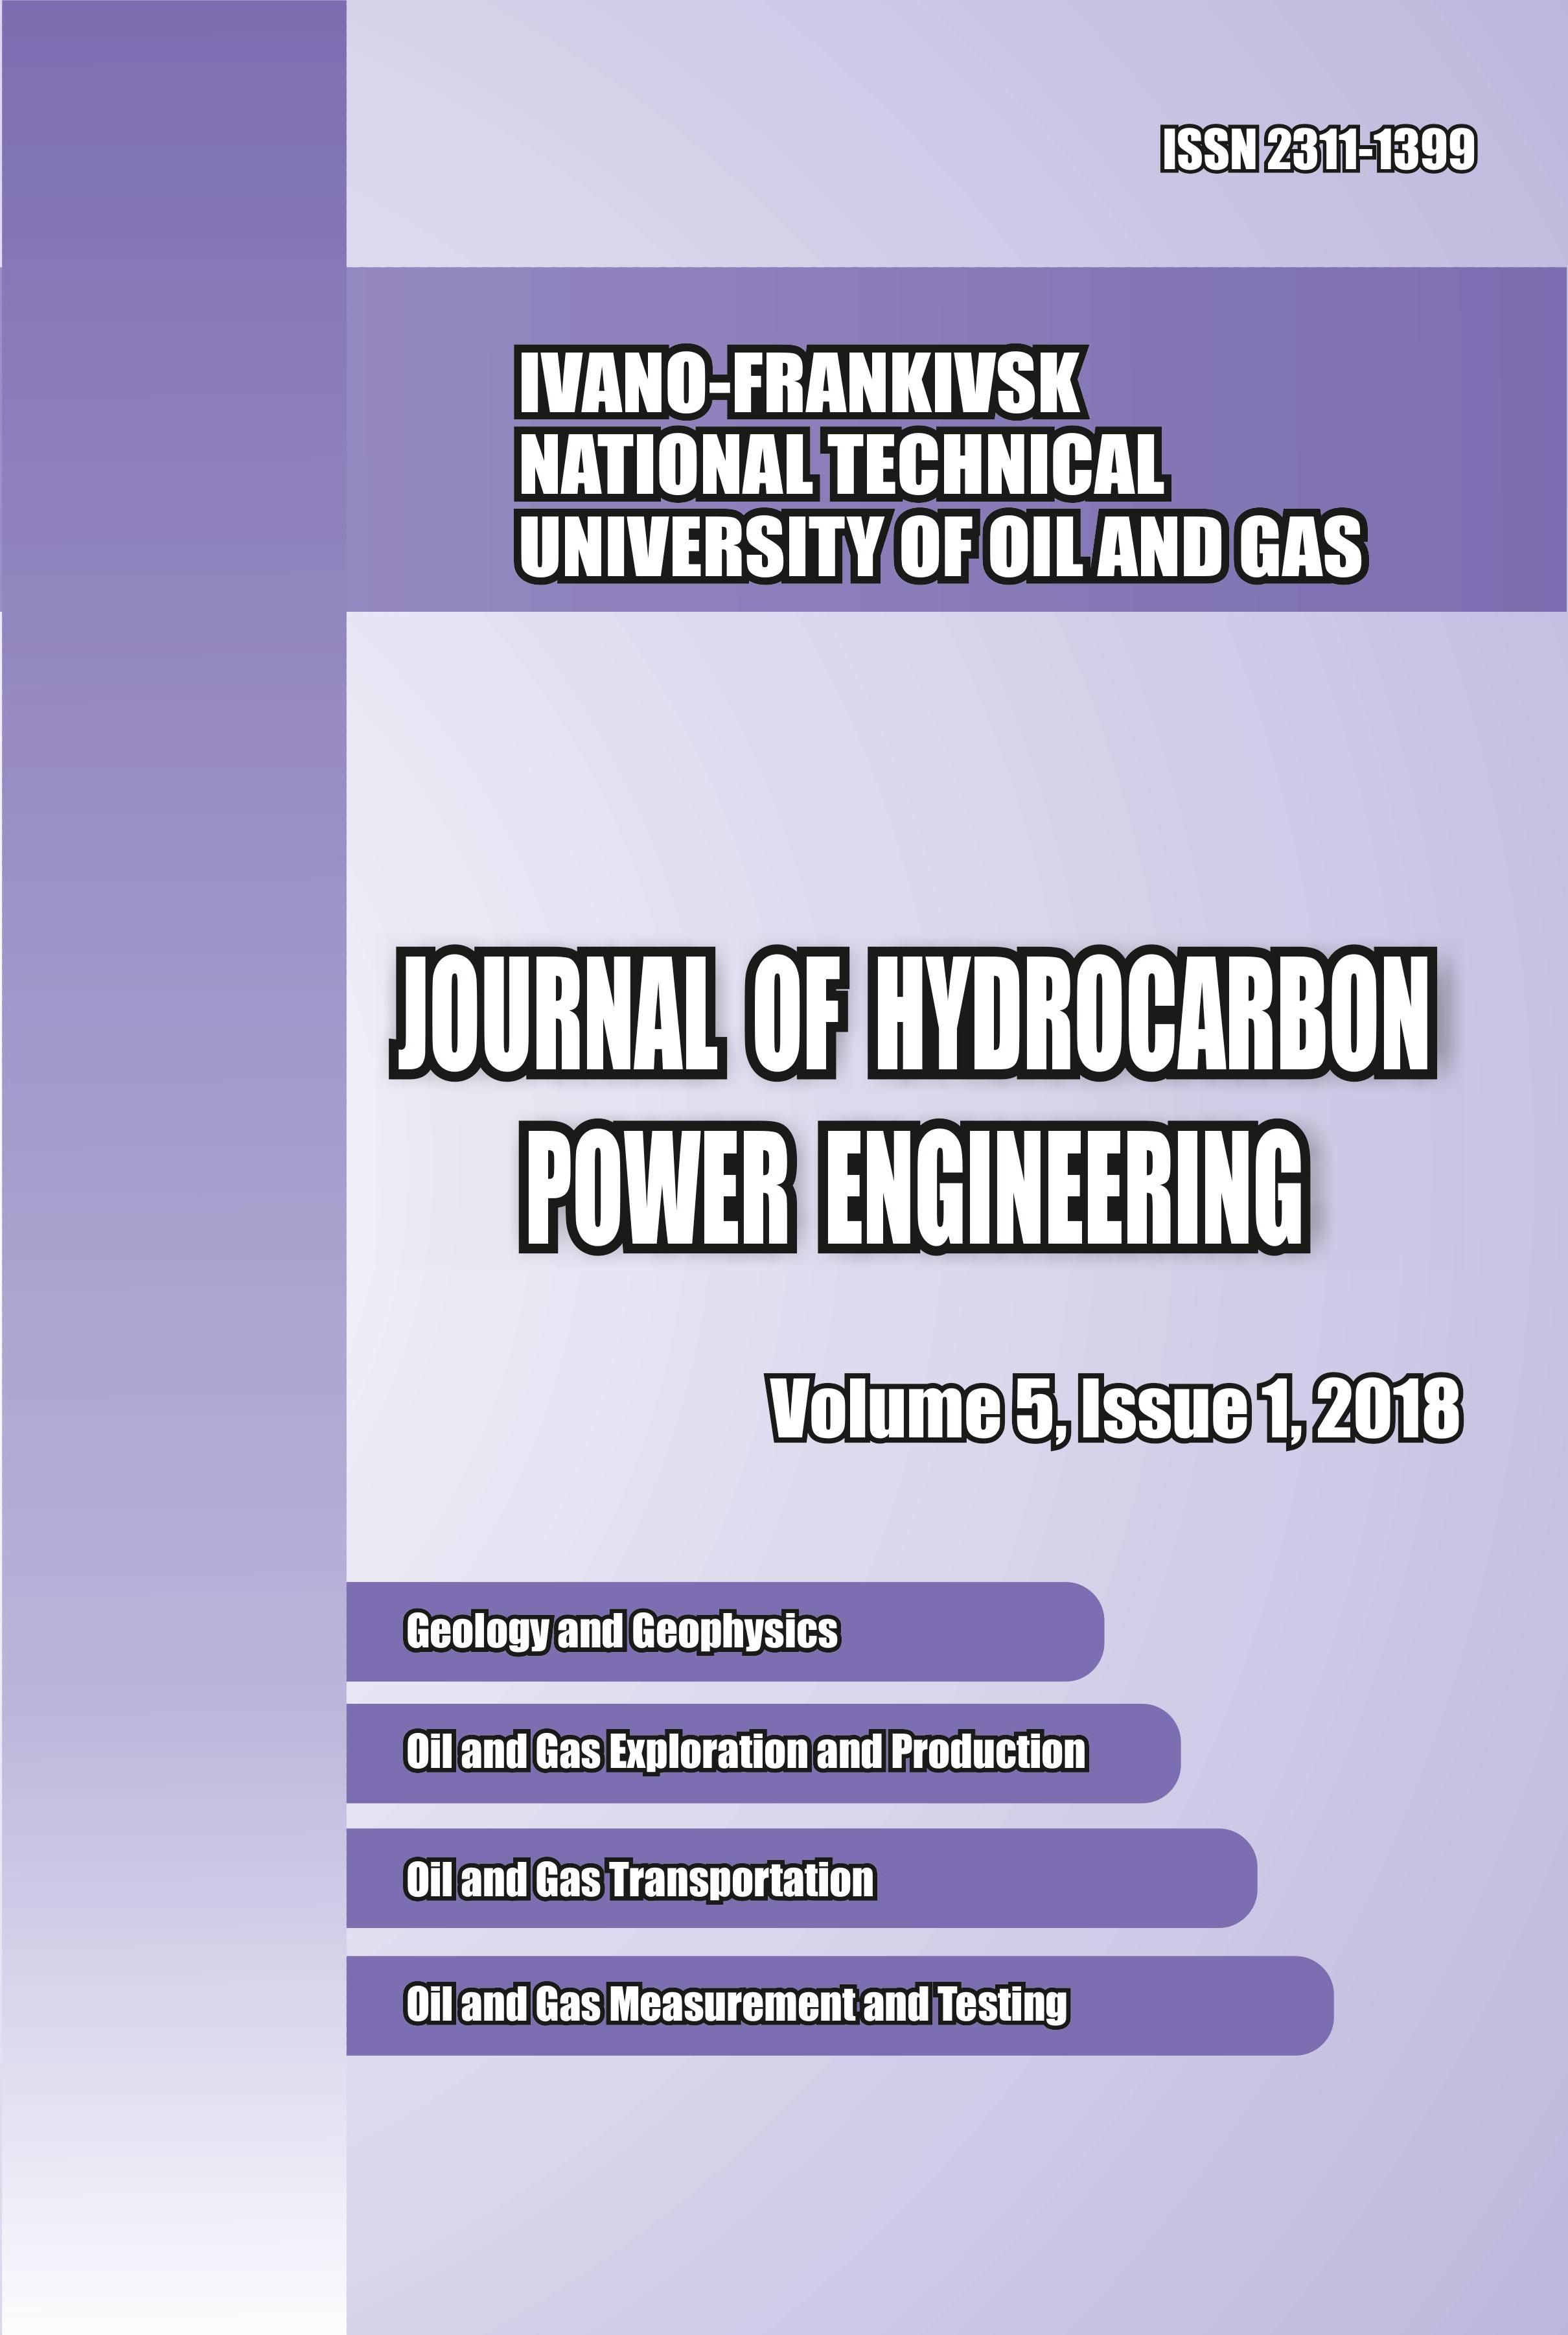 					View Vol. 5 No. 1 (2018): JOURNAL OF HYDROCARBON POWER ENGINEERING
				